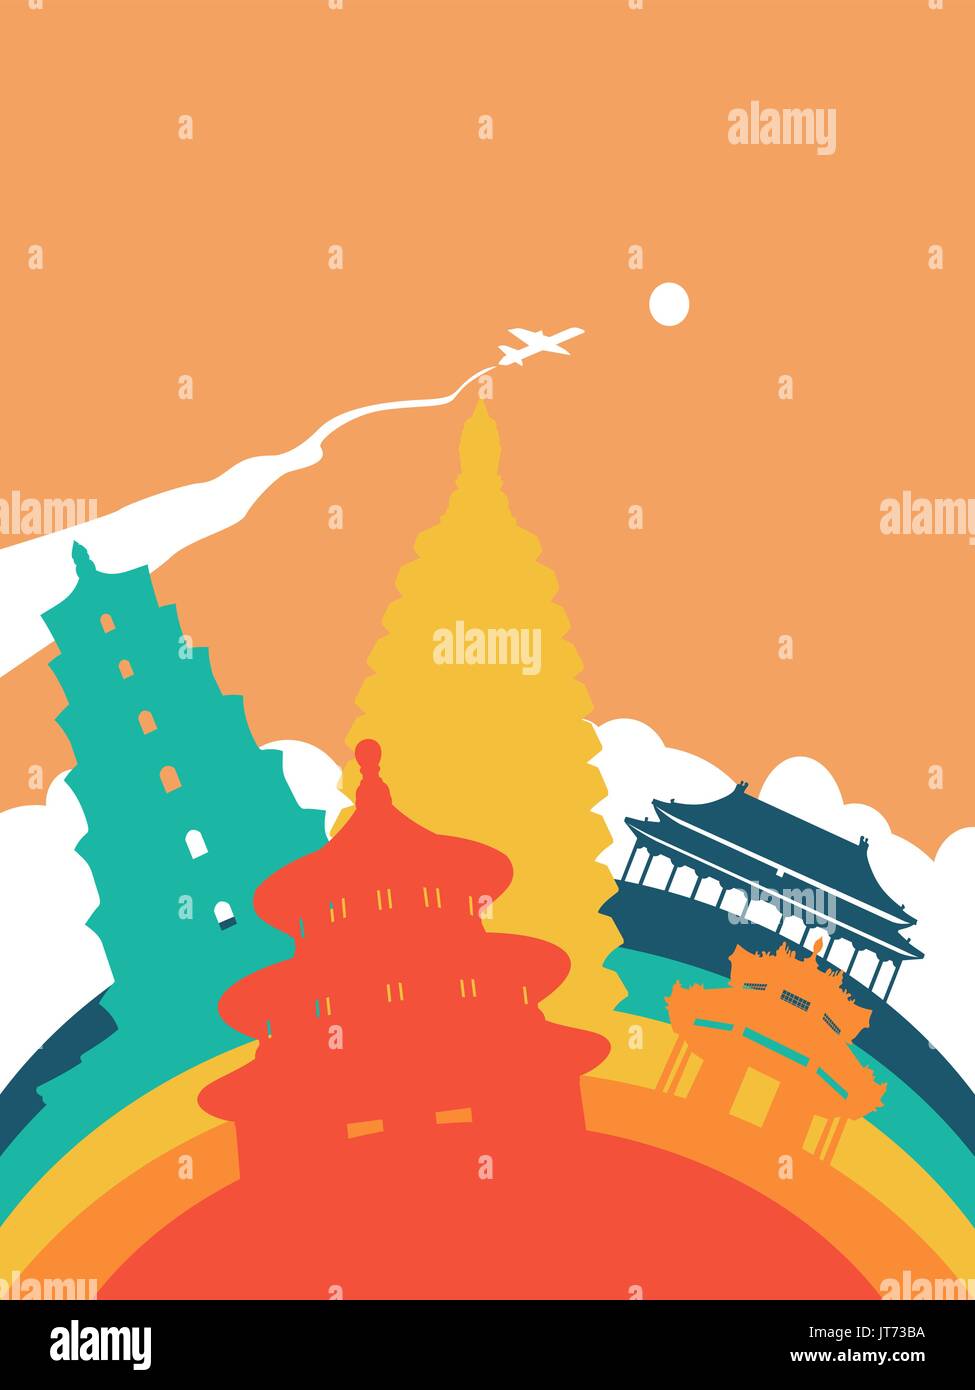 Travel China landscape illustration, Chinese world landmarks. Includes forbidden city, heaven temple, ancient pagodas. EPS10 vector. Stock Vector